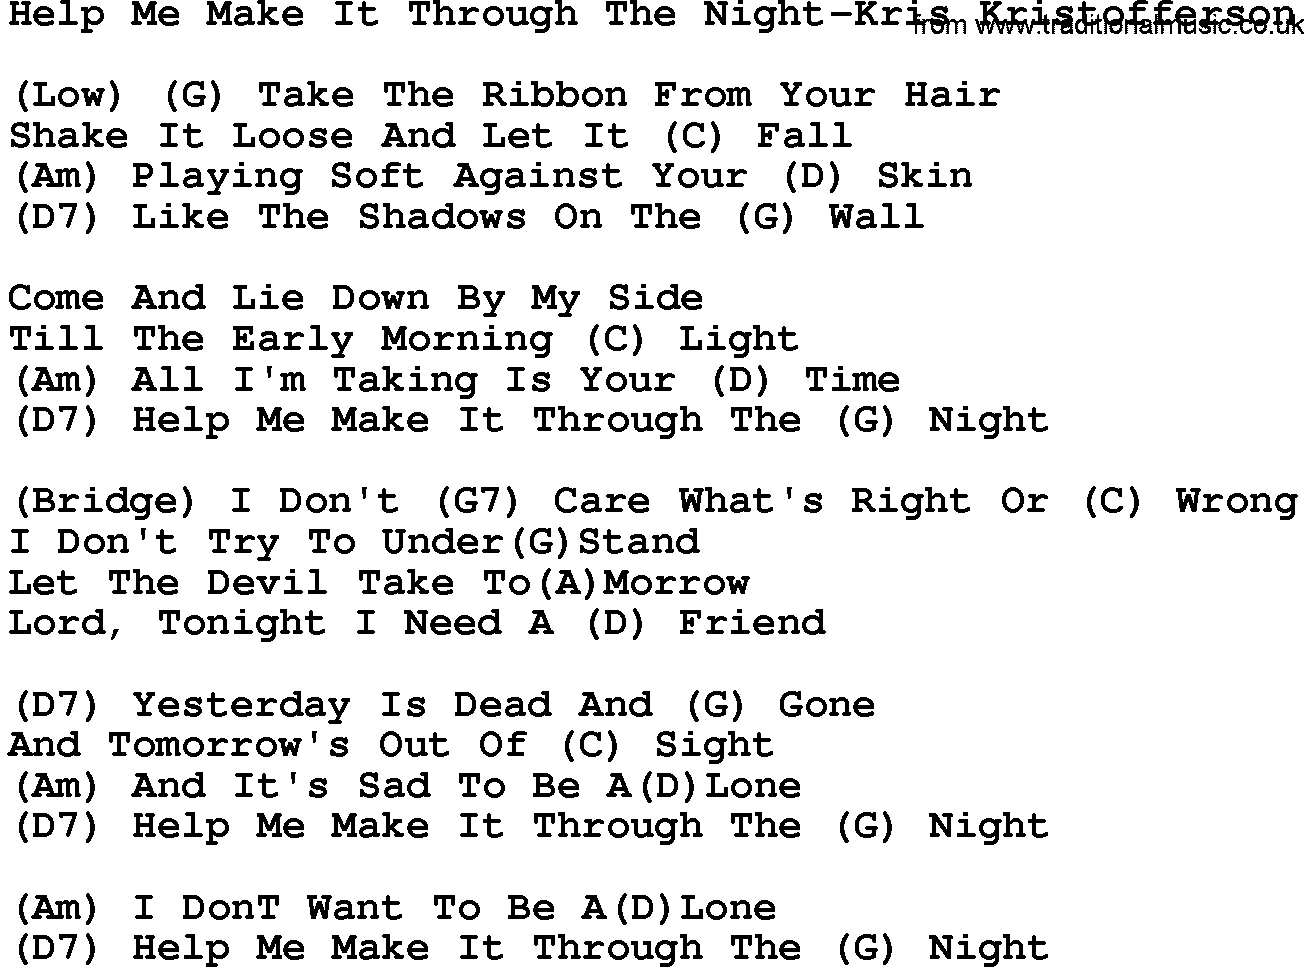 Country music song: Help Me Make It Through The Night-Kris Kristofferson lyrics and chords